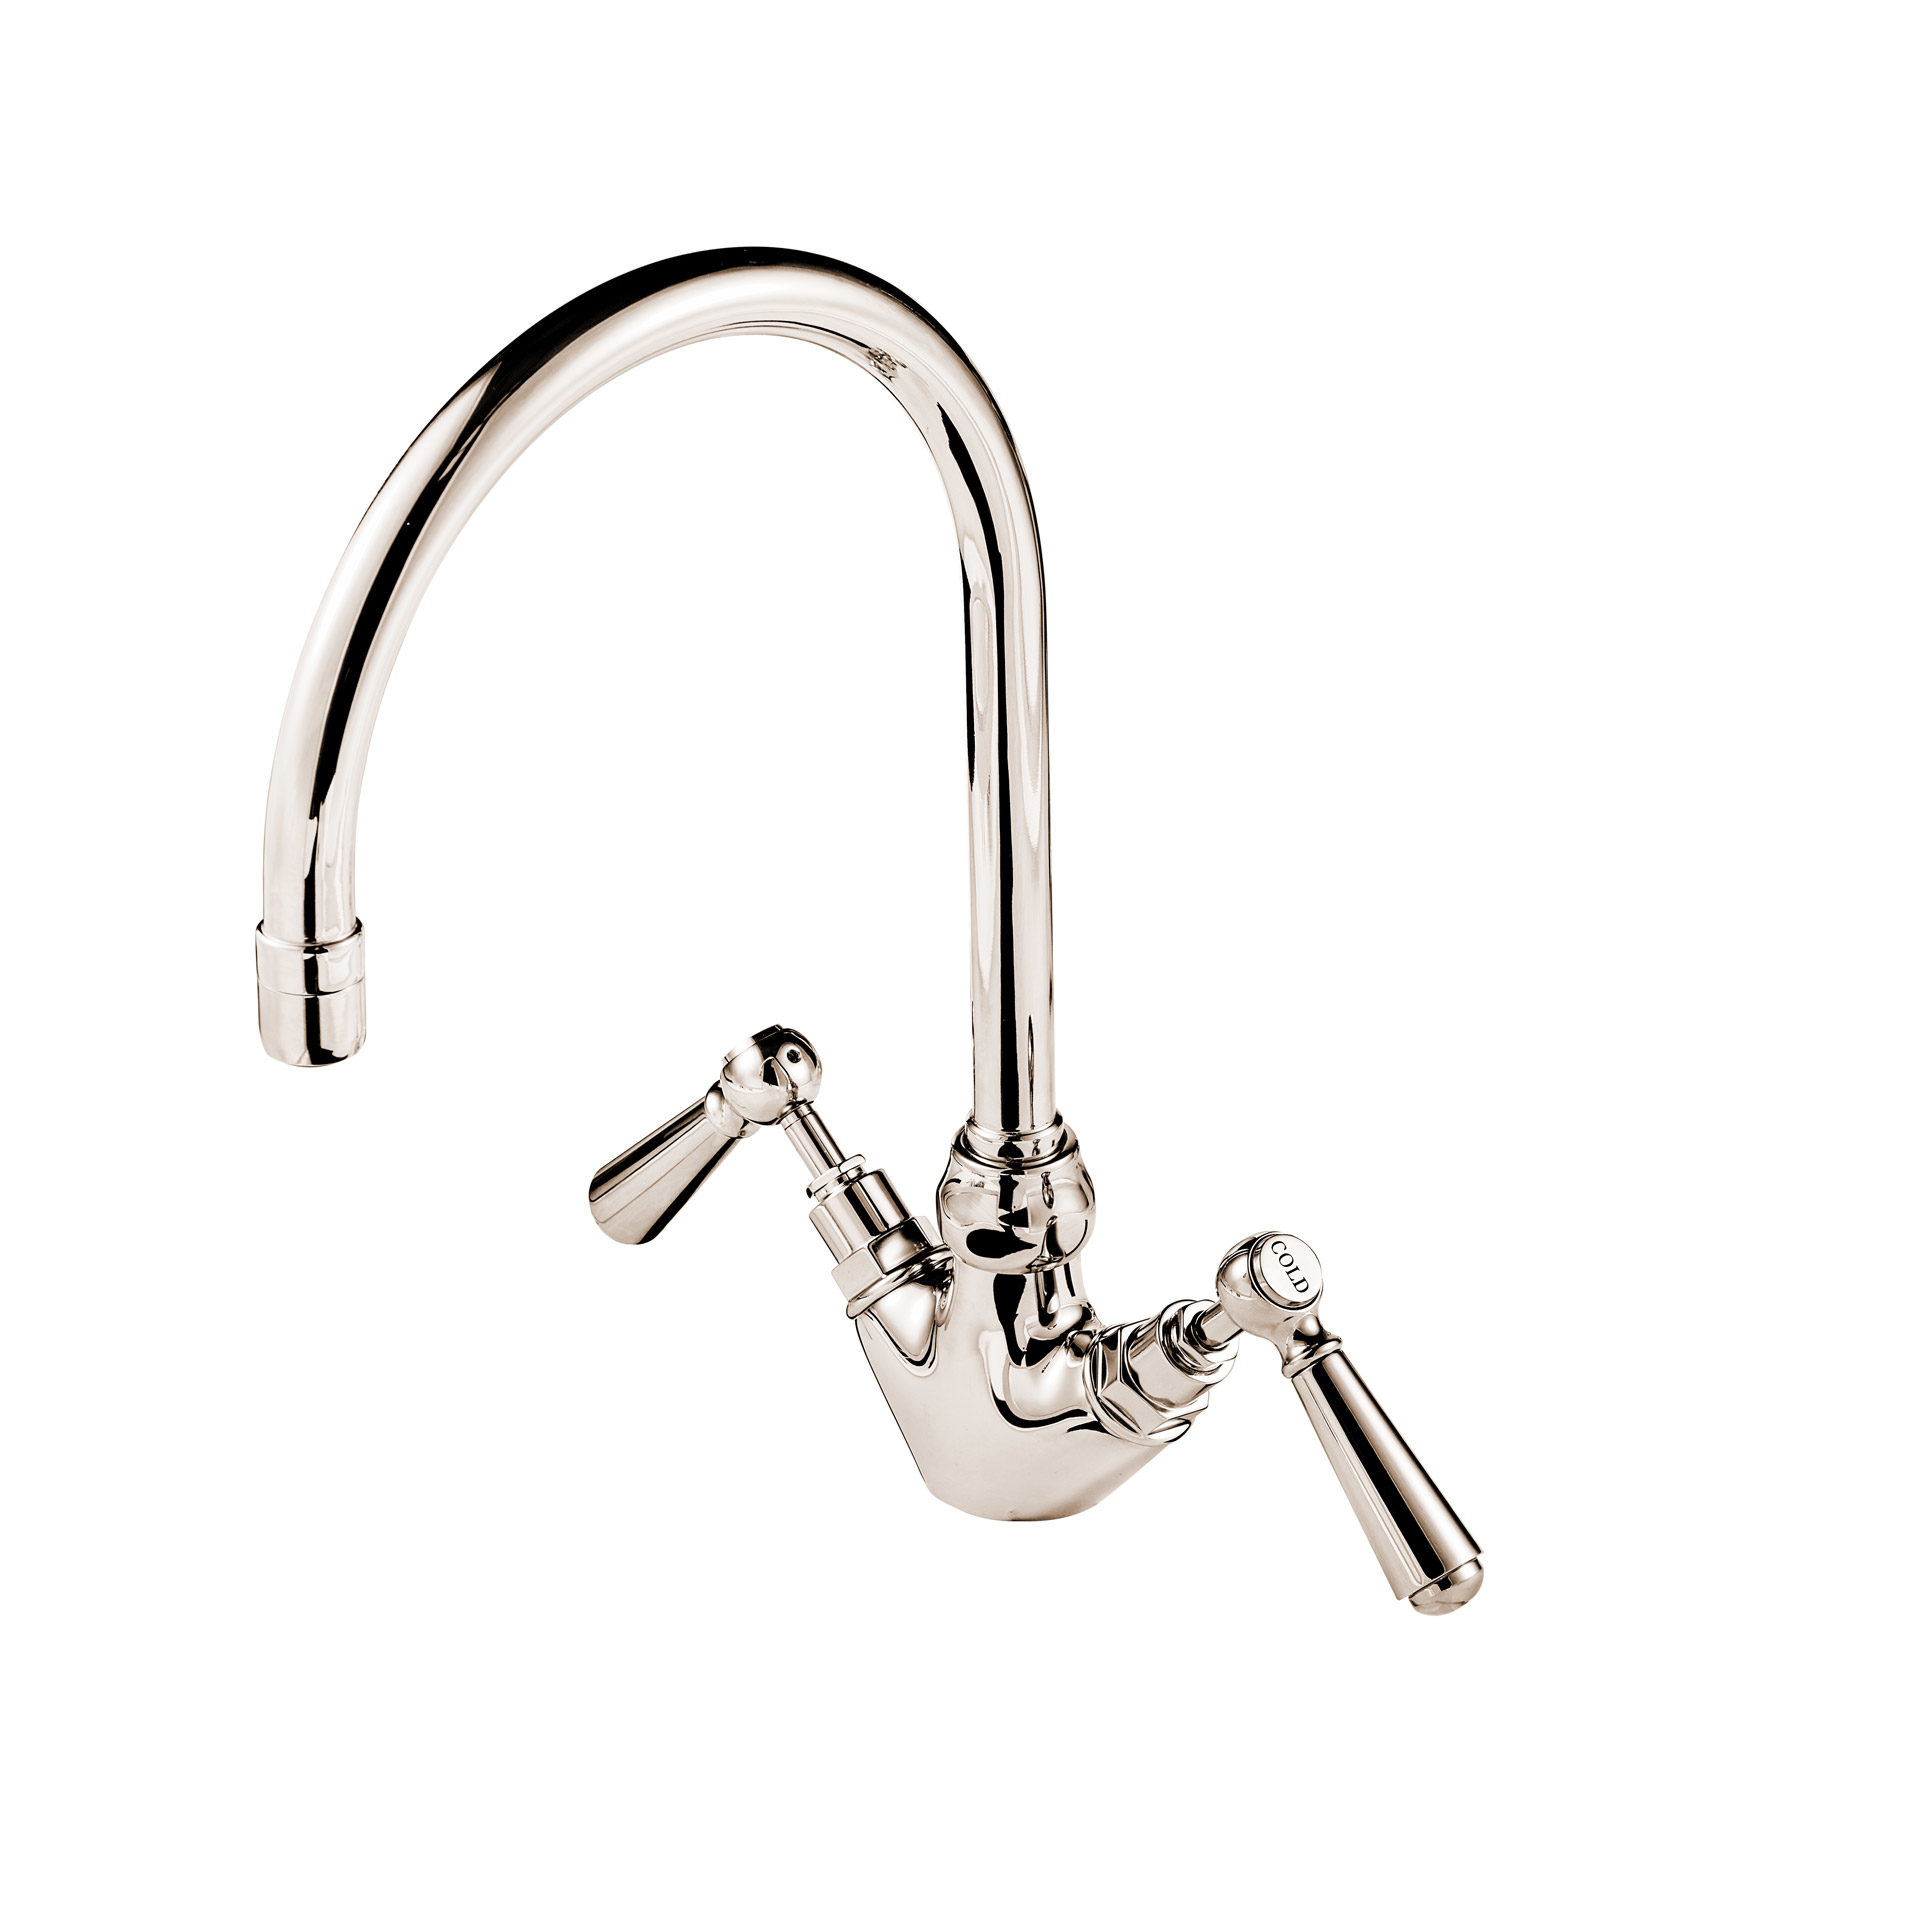 Deck mounted kitchen taps mixer with single hole with metal levers